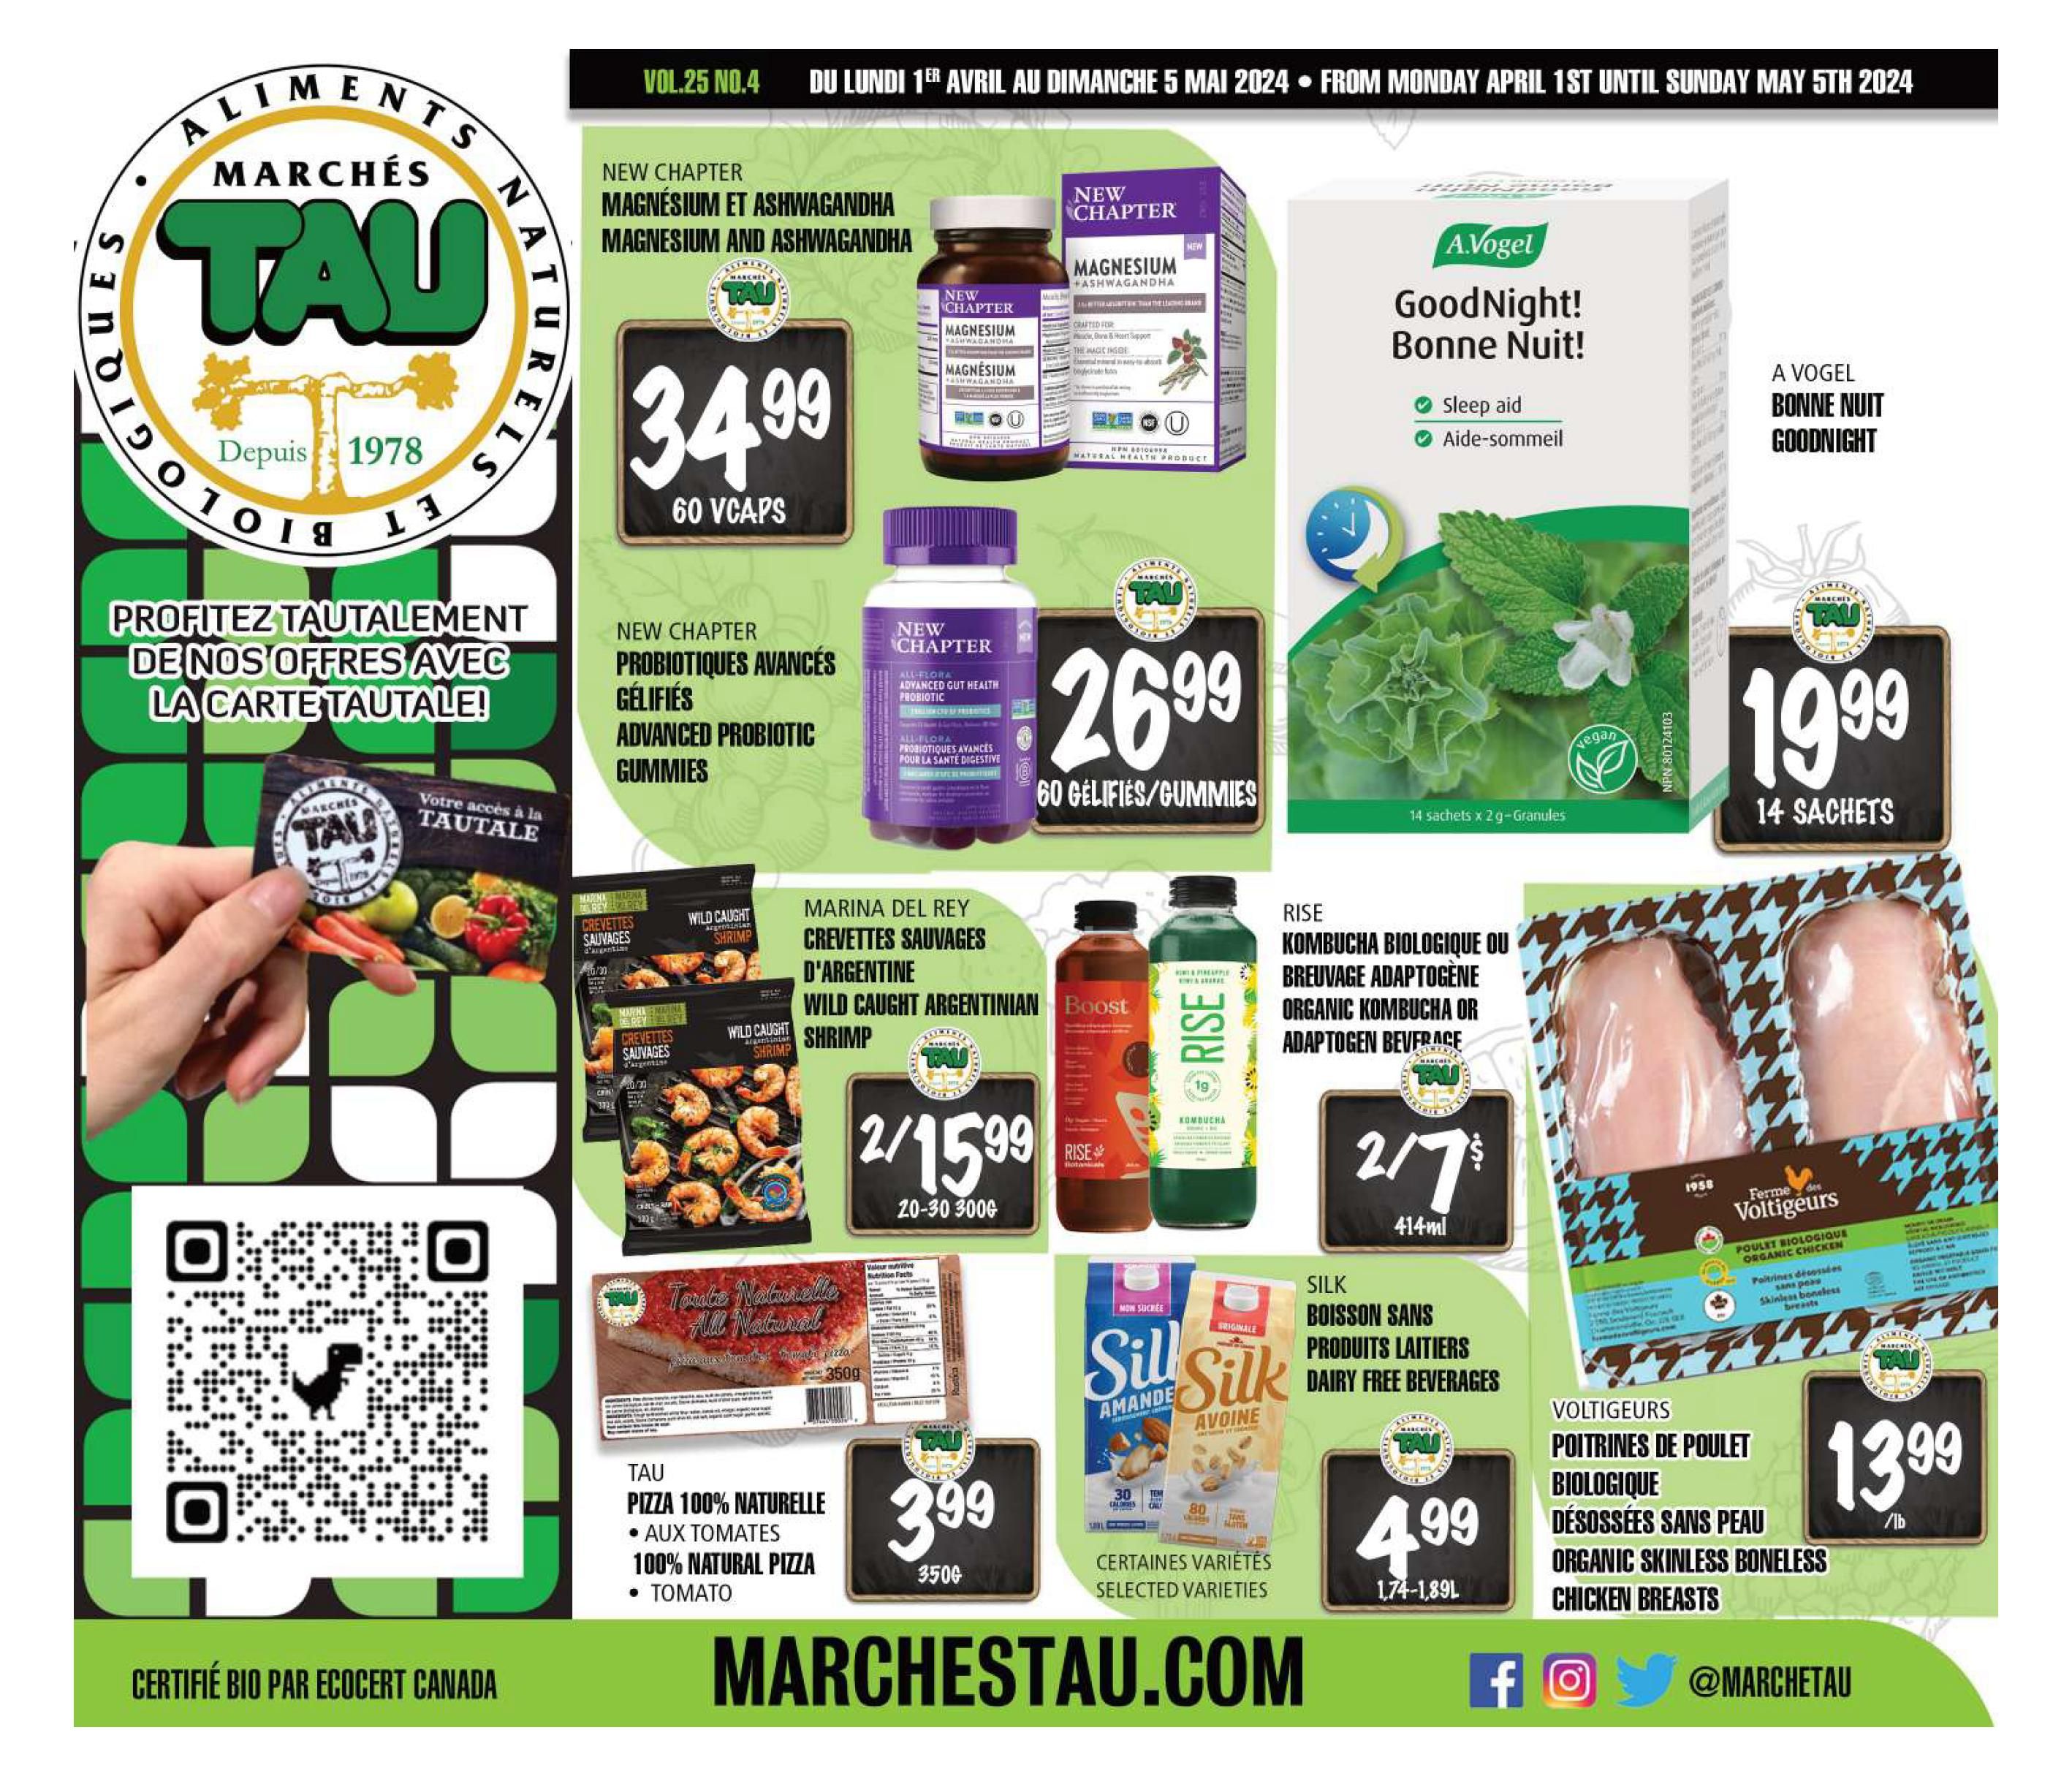 Marches TAU - Monthly Flyer